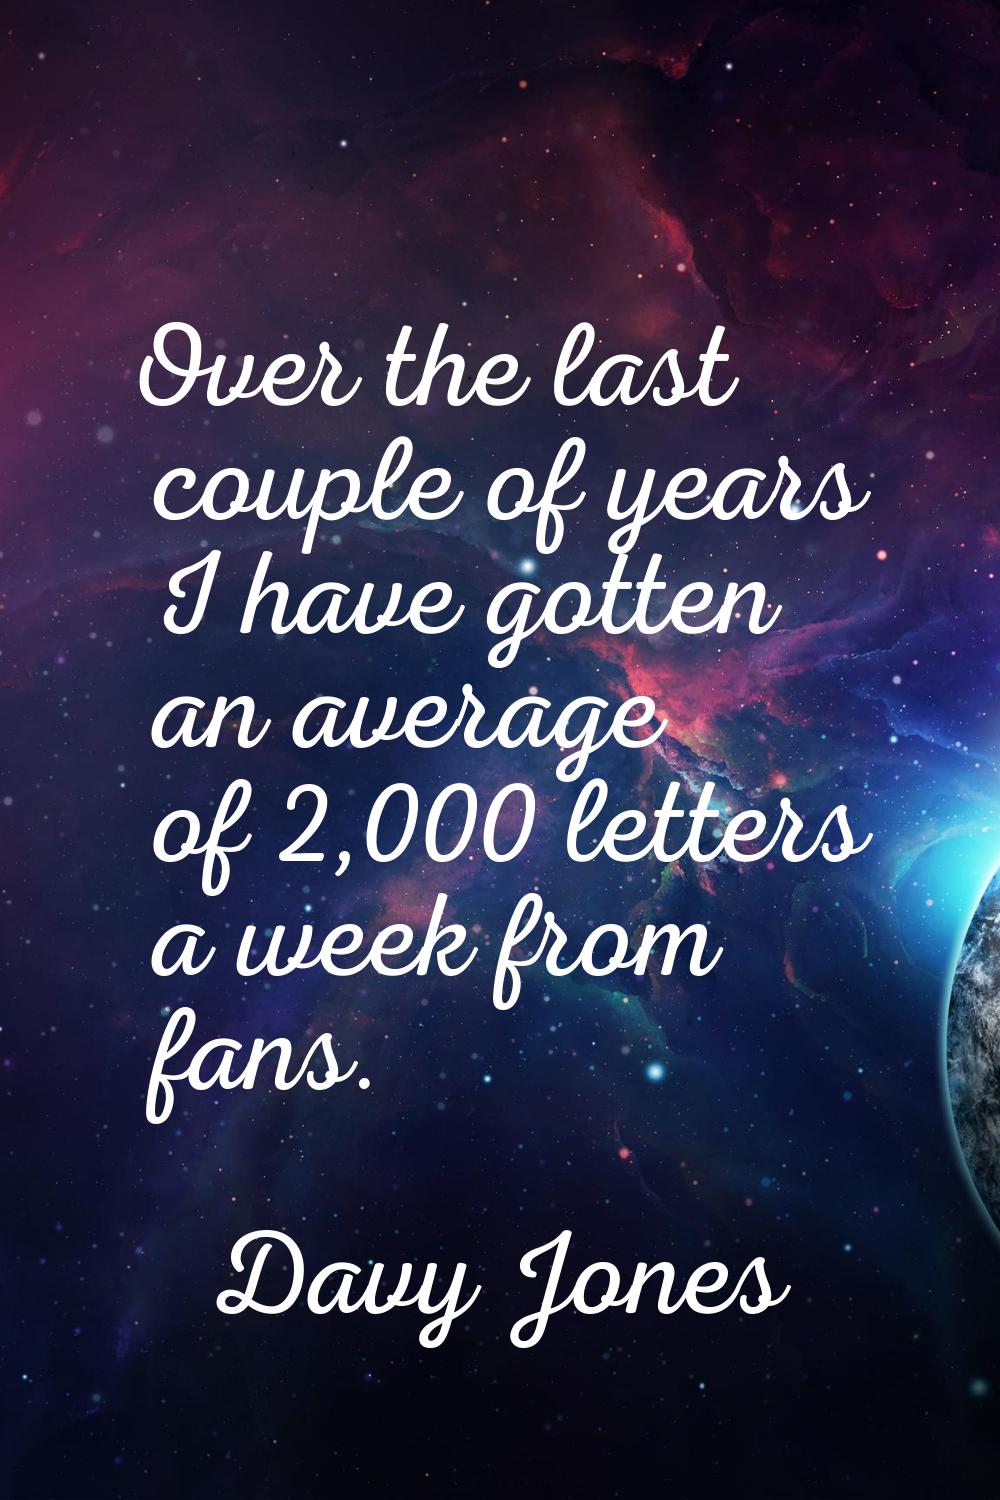 Over the last couple of years I have gotten an average of 2,000 letters a week from fans.